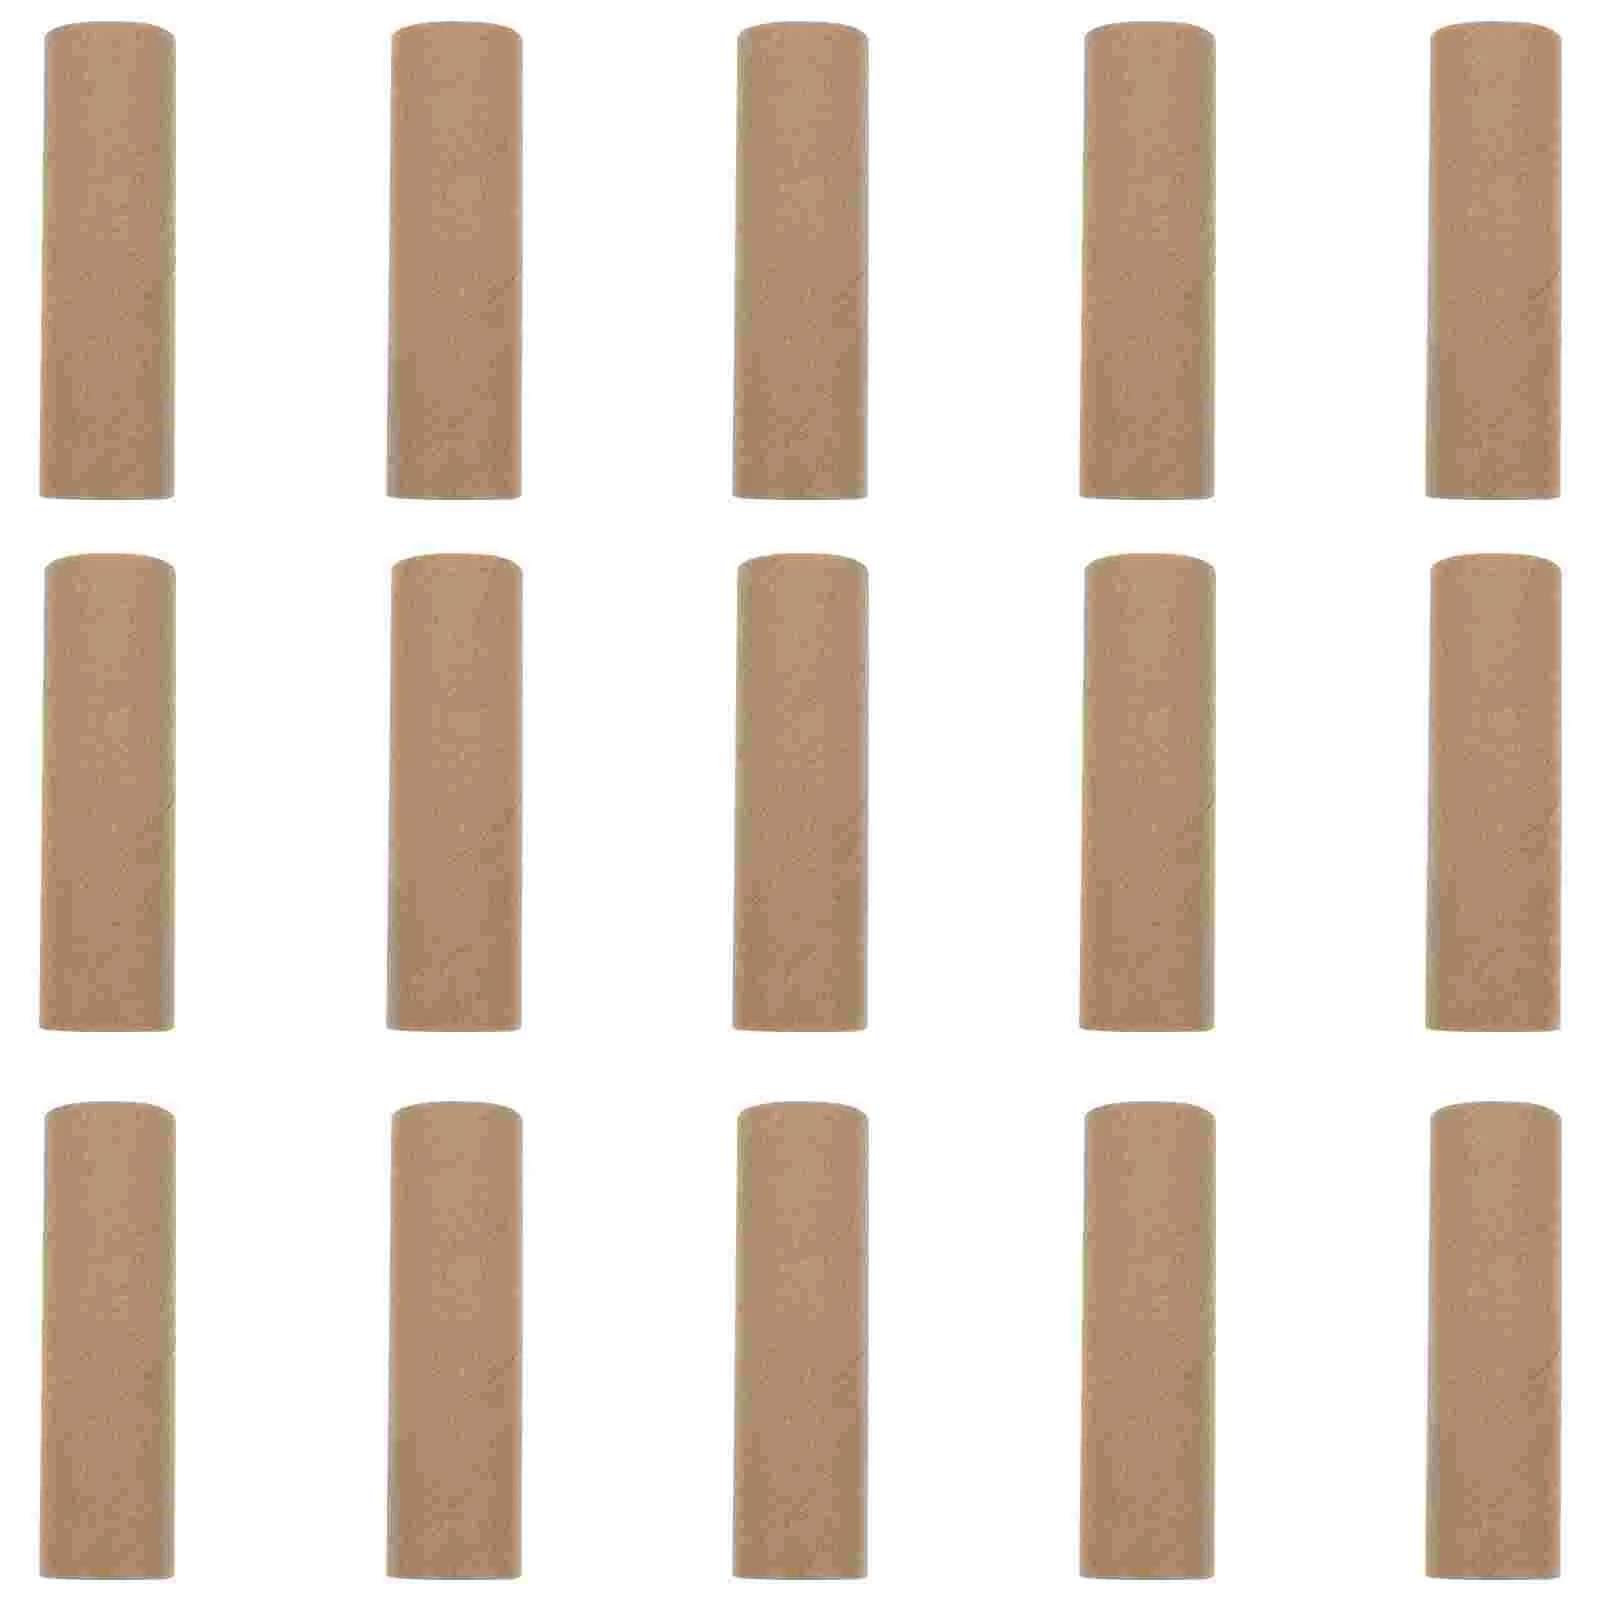 

15pcs Round Poster Storage Tubes Cardboard Tubes Mailing Tubes for DIY Rolling papers